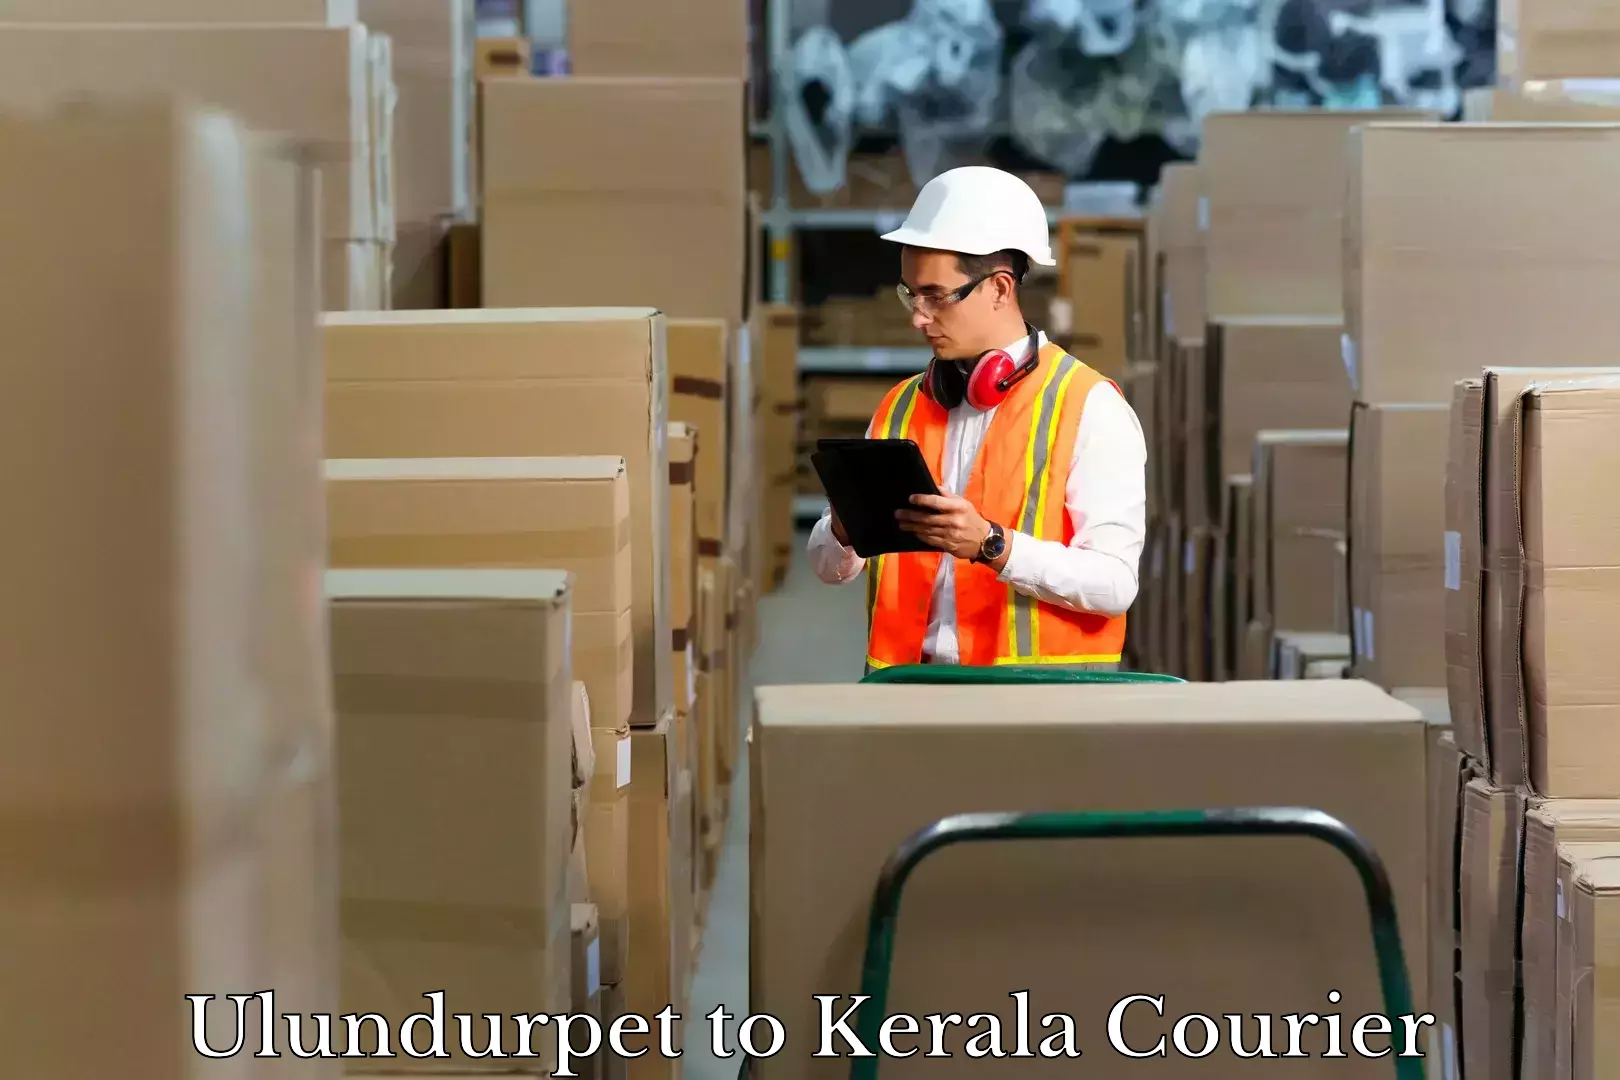 Instant baggage transport quote Ulundurpet to Thamarassery